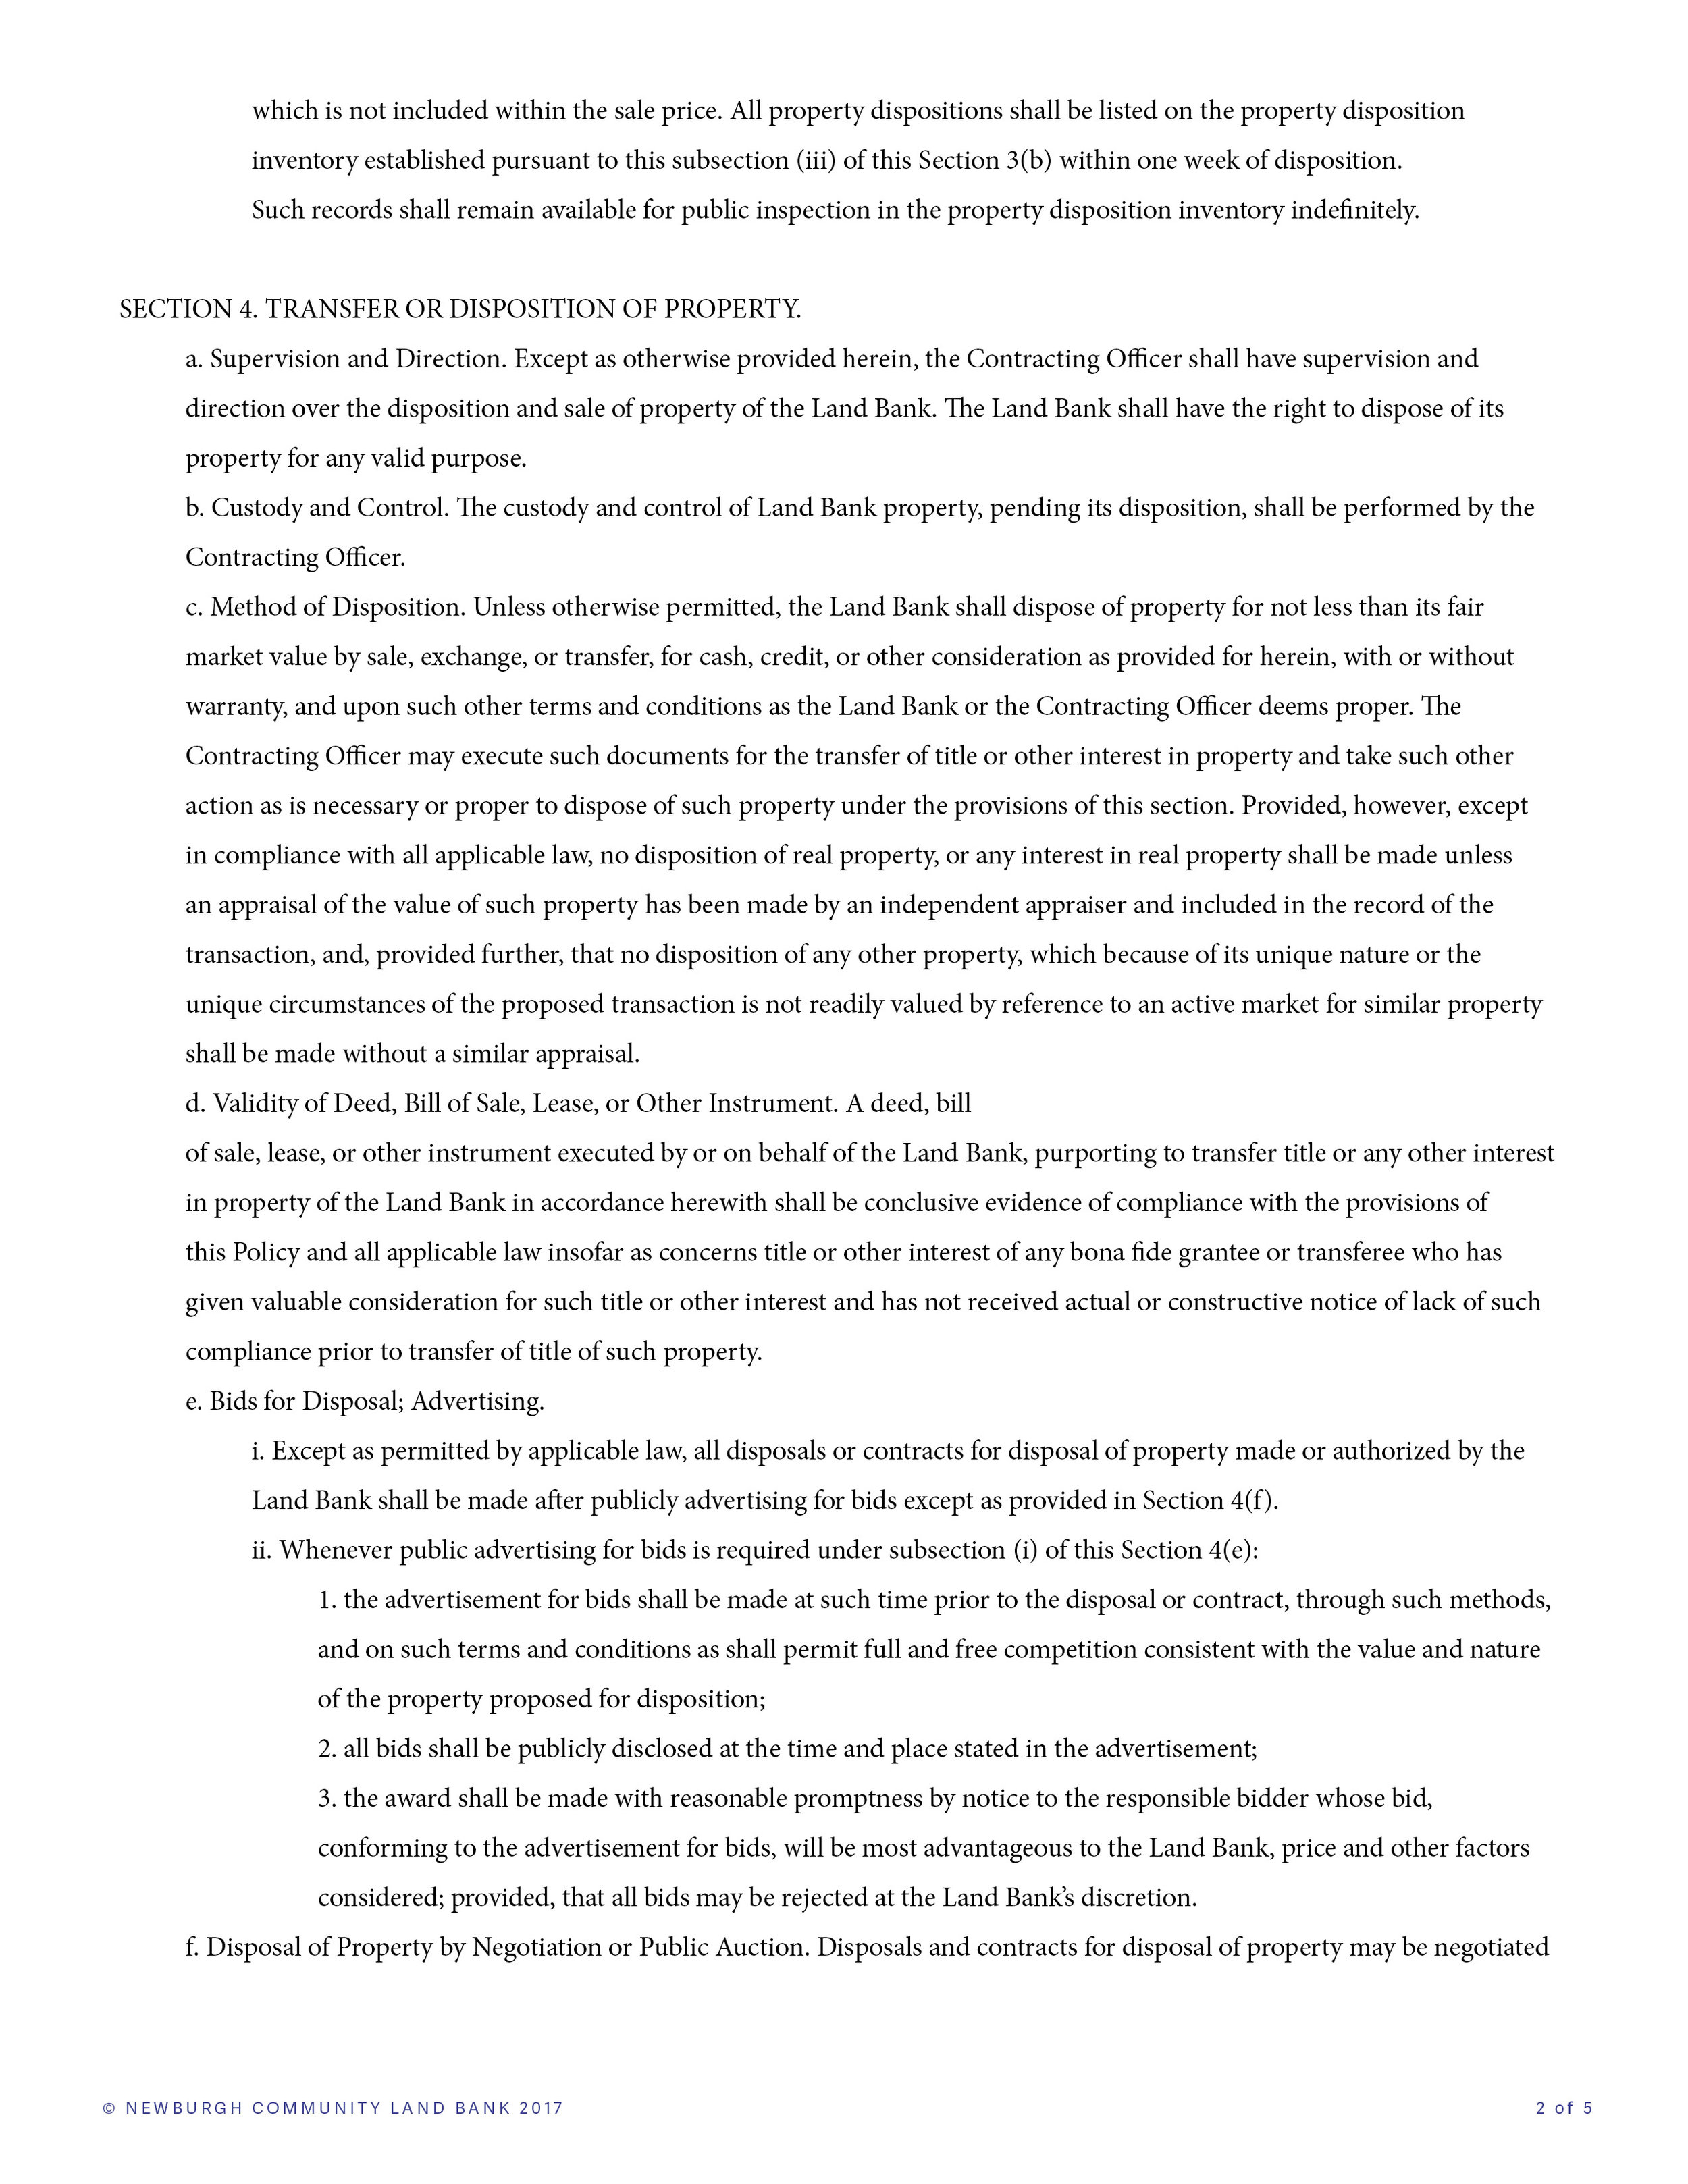 NCLB Disposition Policy2.jpg